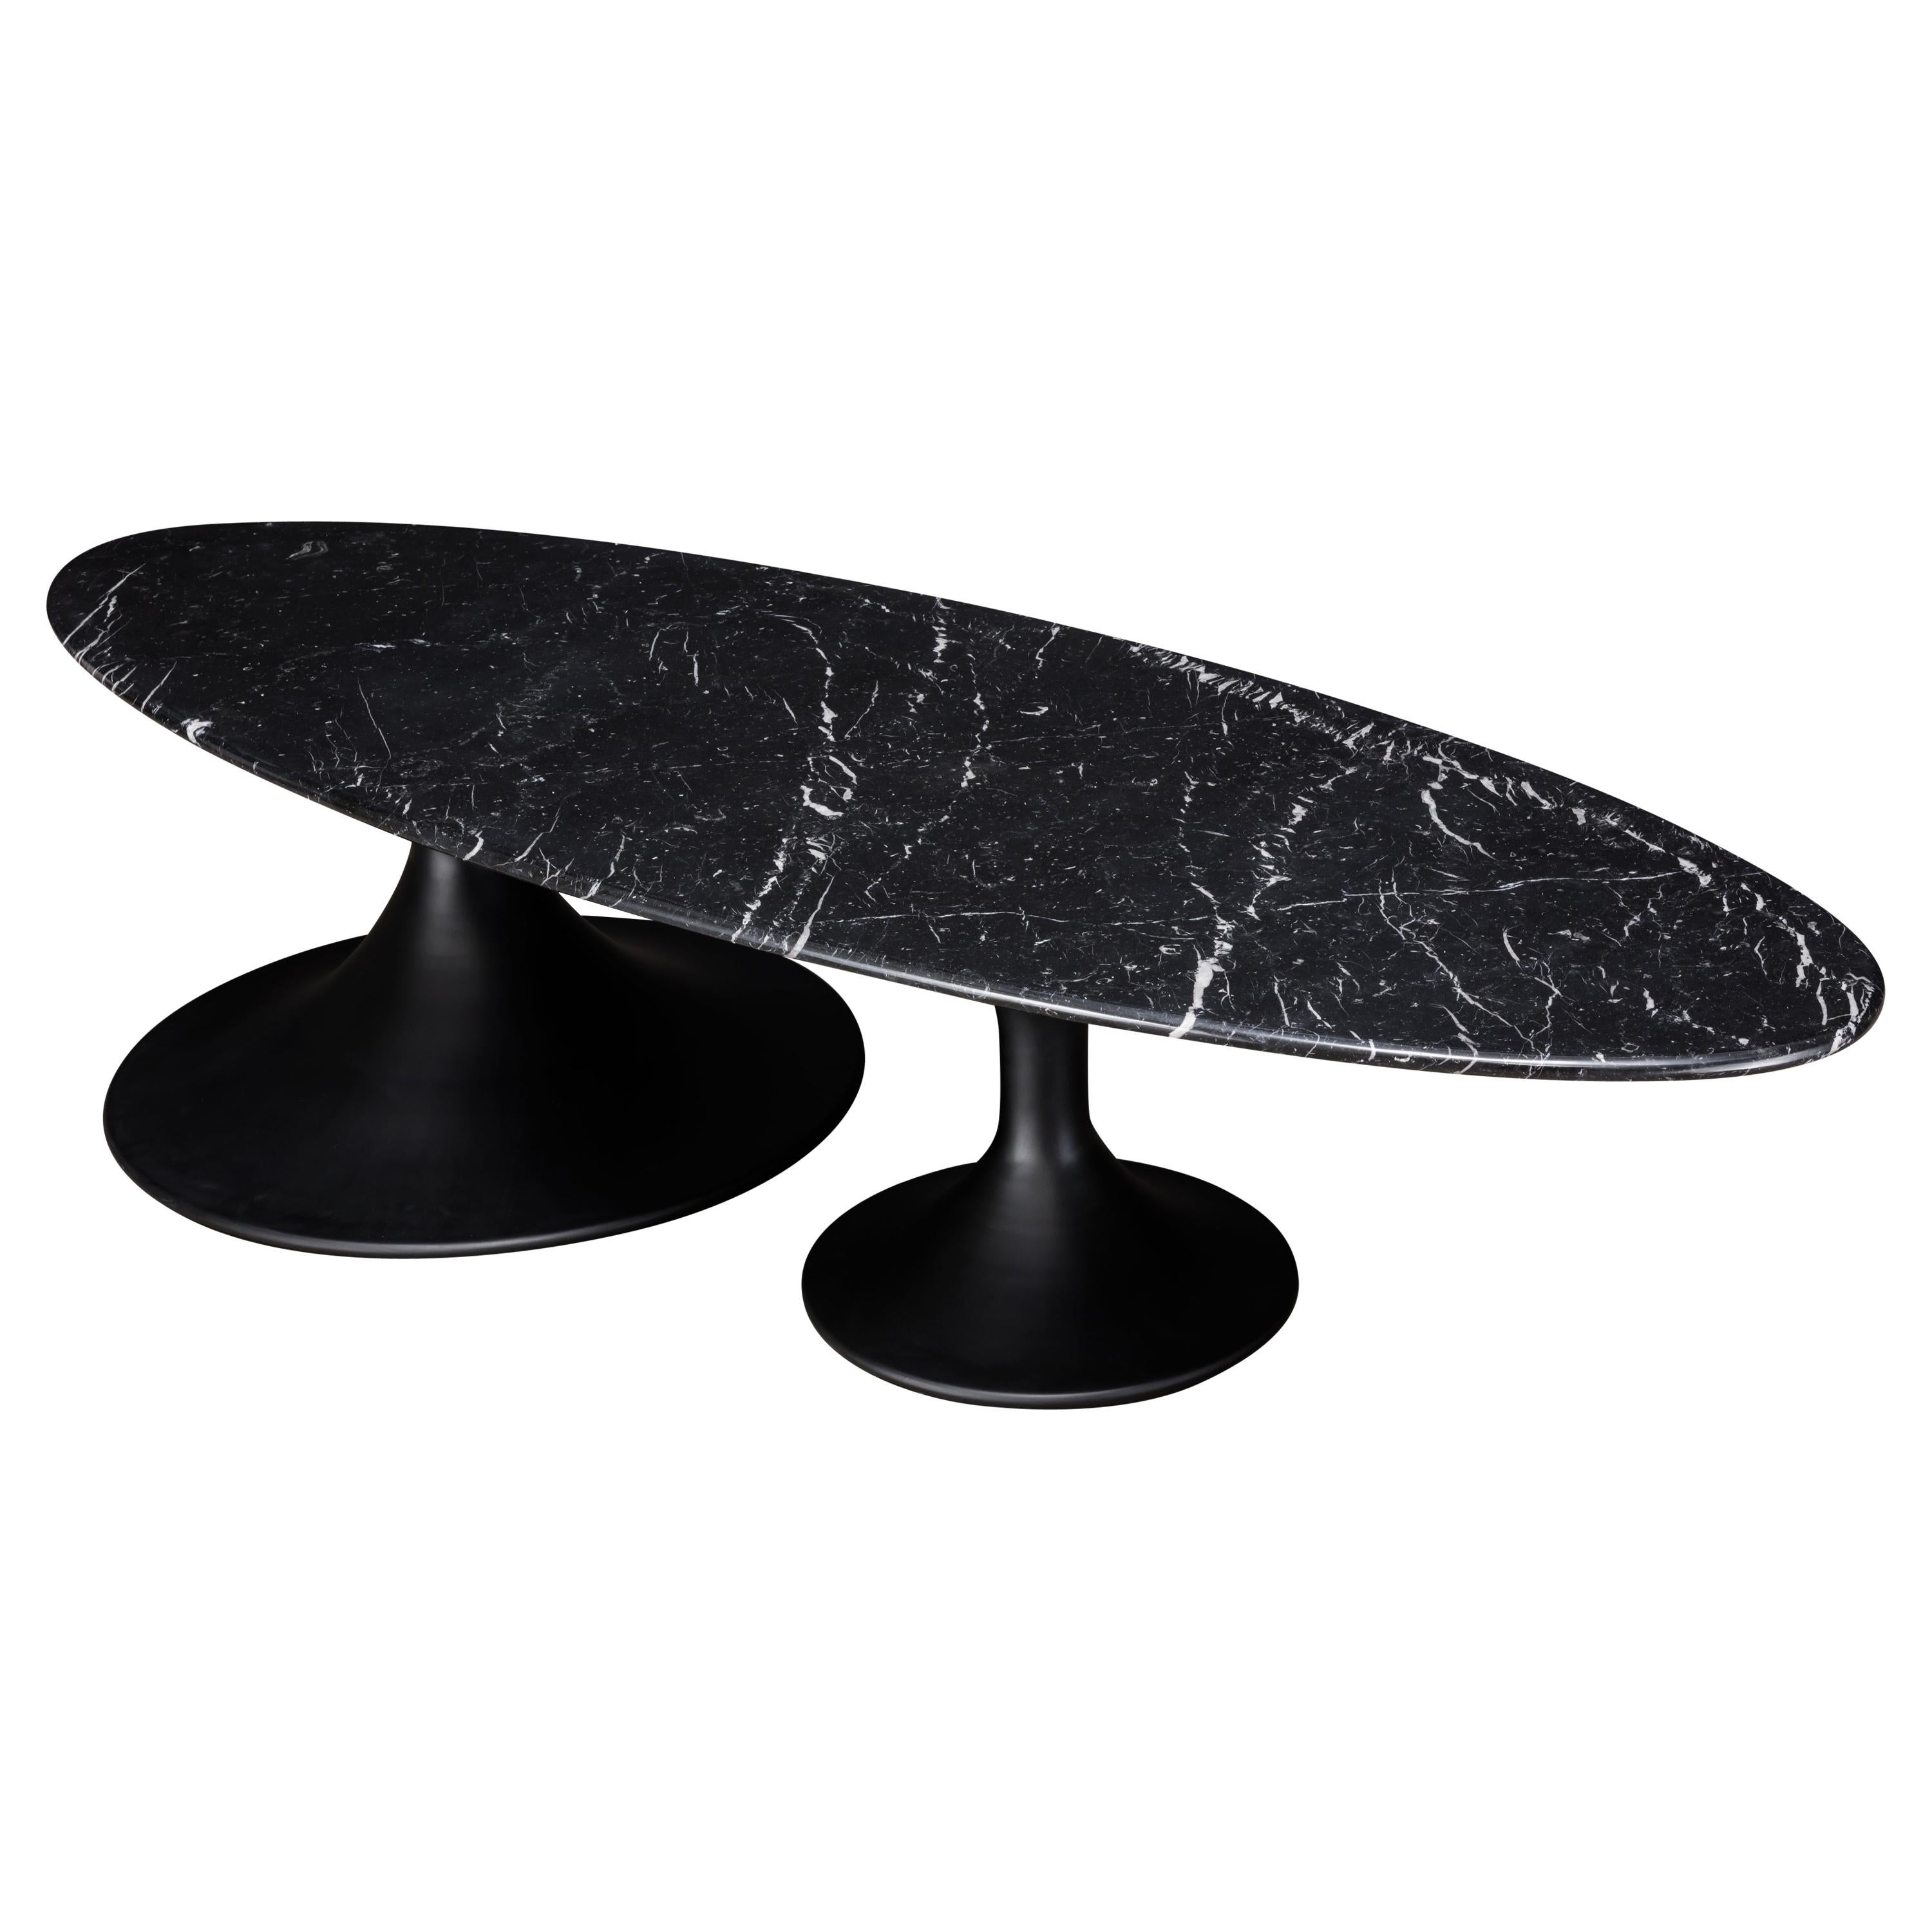 DRIP COFFEE TABLE - Powder-Coated Black and Nero Marquina Marble